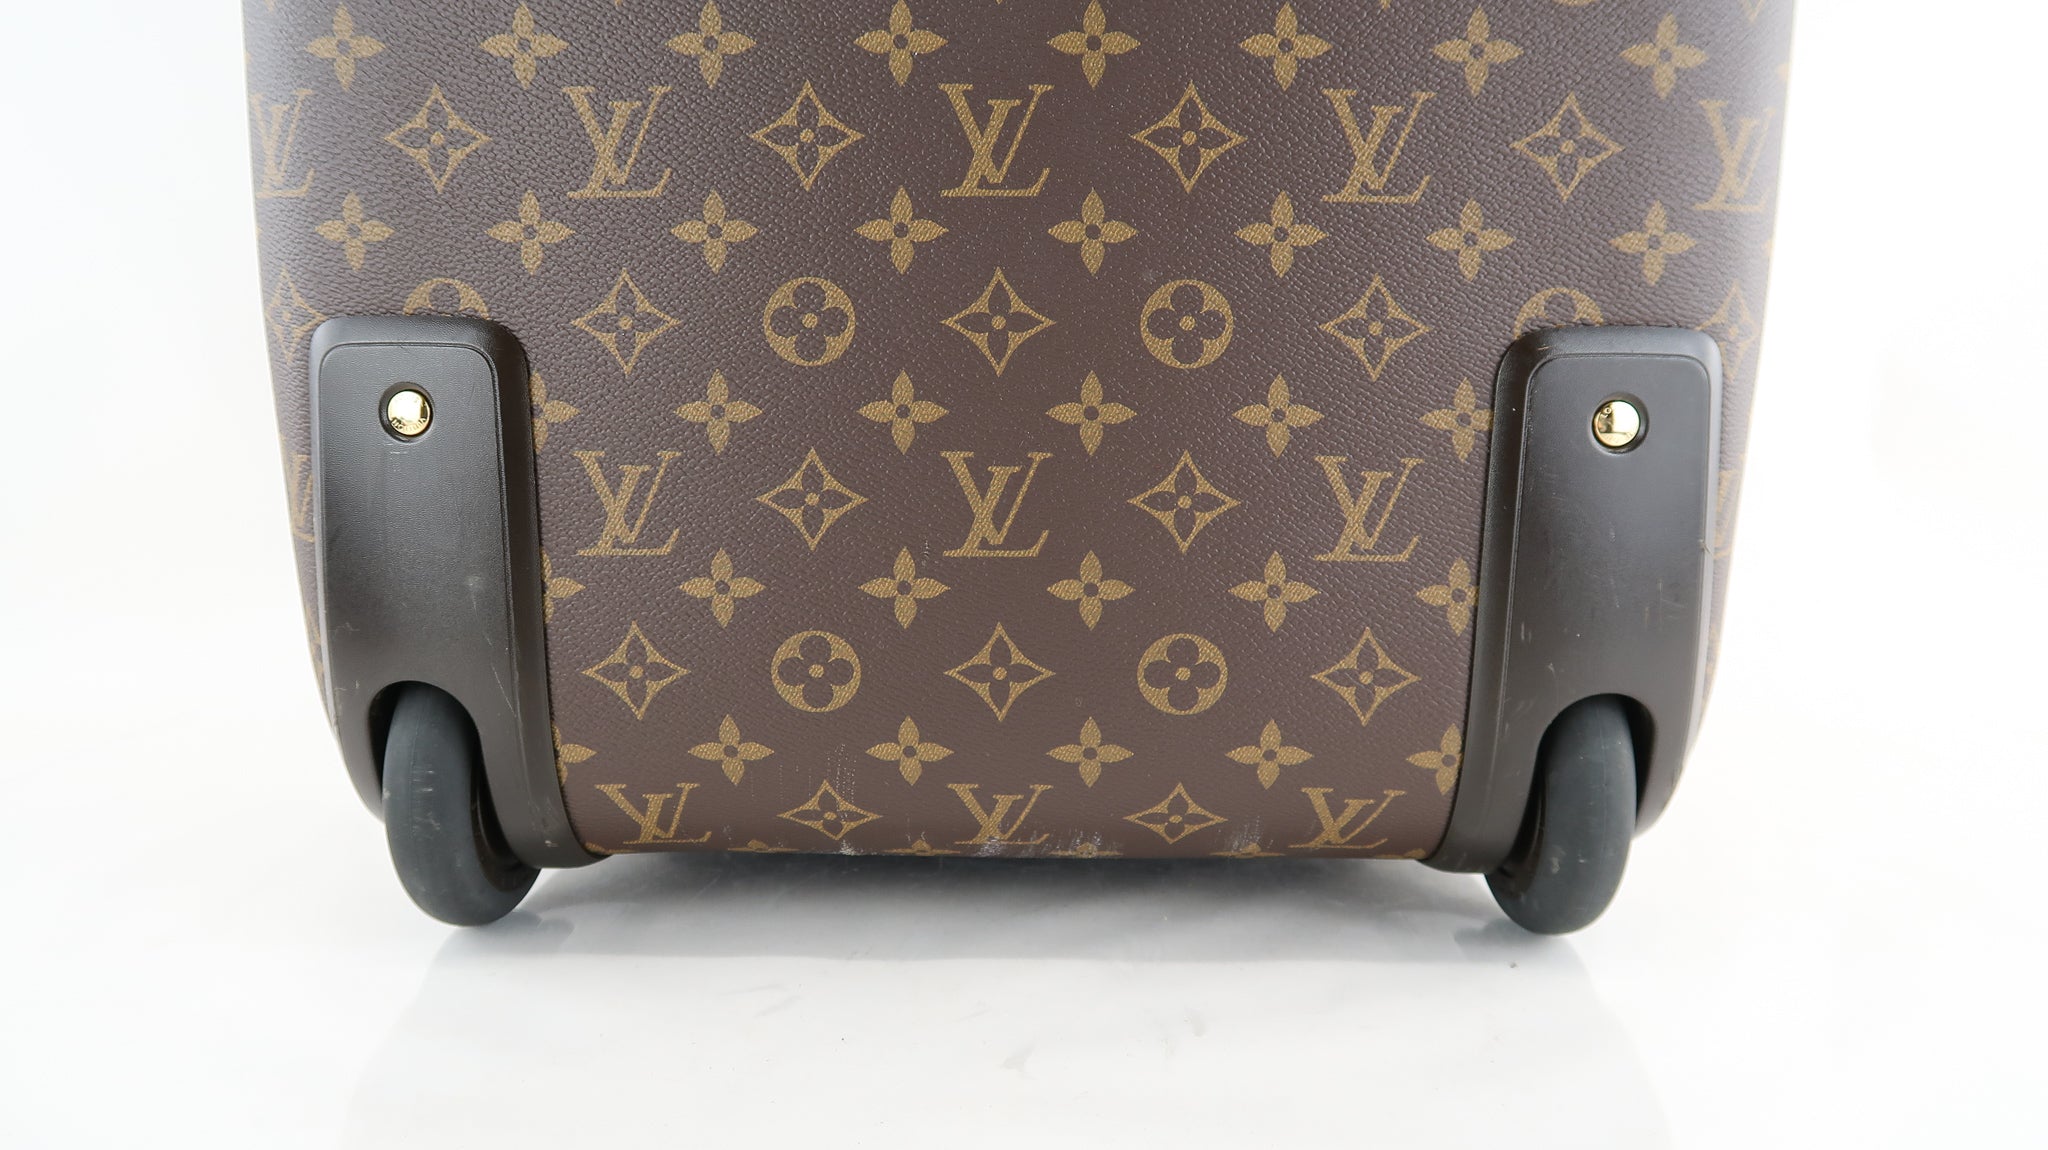 Brand new Louis Vuitton garment bag with 5 hangers - Pinth Vintage Luggage